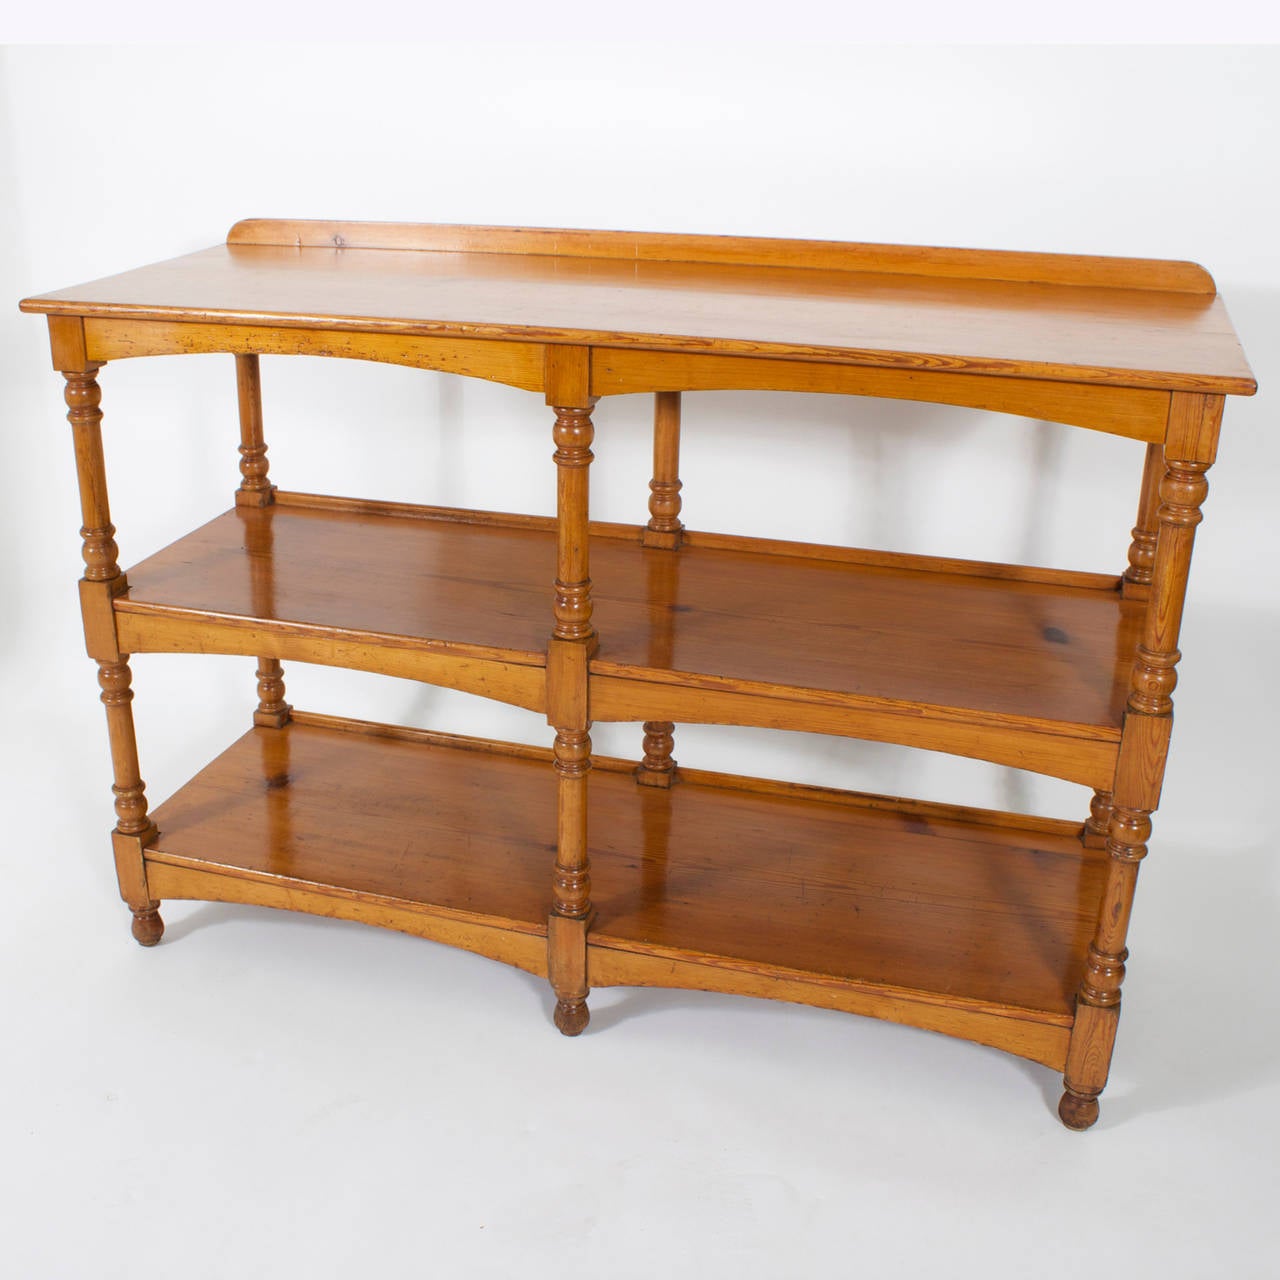 A late 19th C. 3 tiered English pine server, set of shelves or etagere with turned supports and feet, scalloped skirts and a warm aged finish. Classic lines, with plenty of room for display. Newly polished.
 